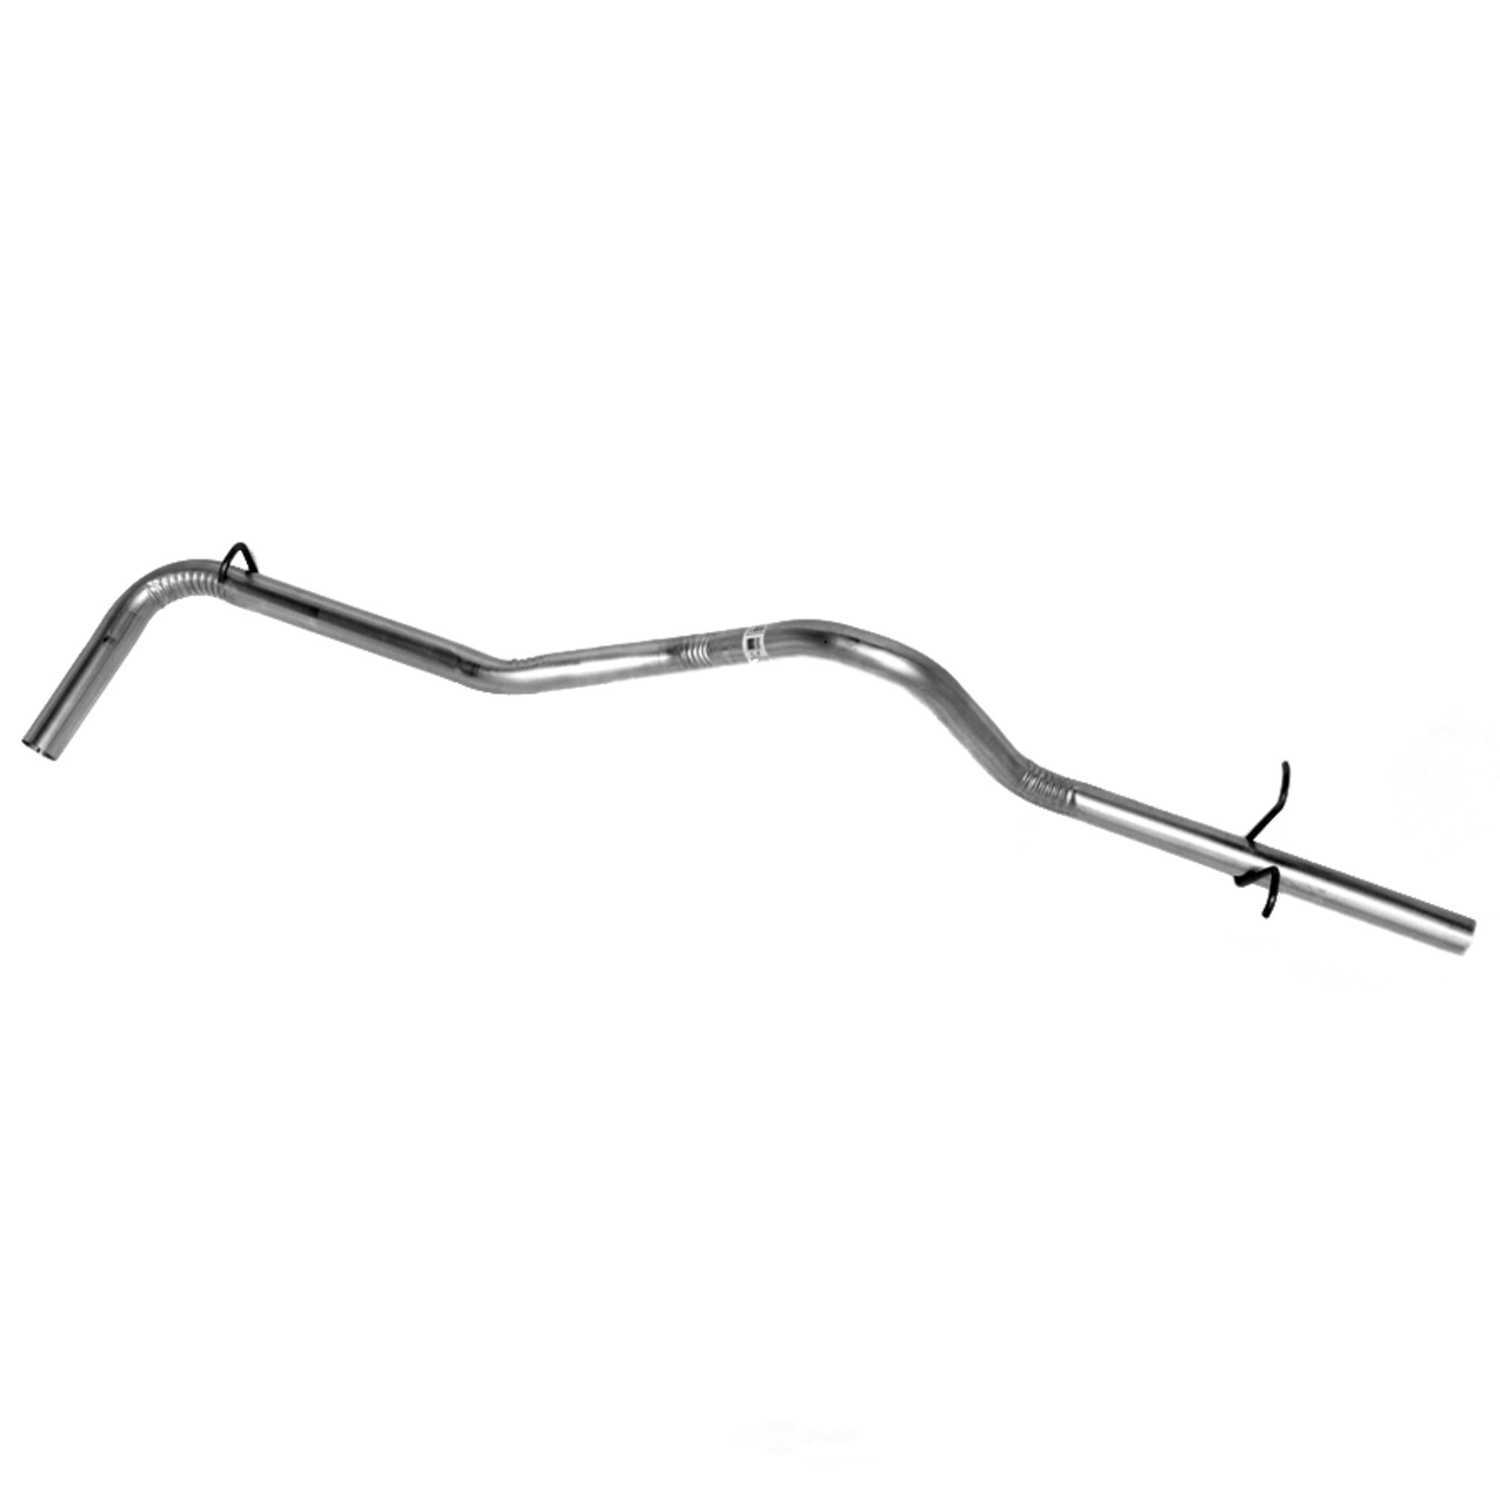 WALKER - Exhaust Tail Pipe - WAL 47605